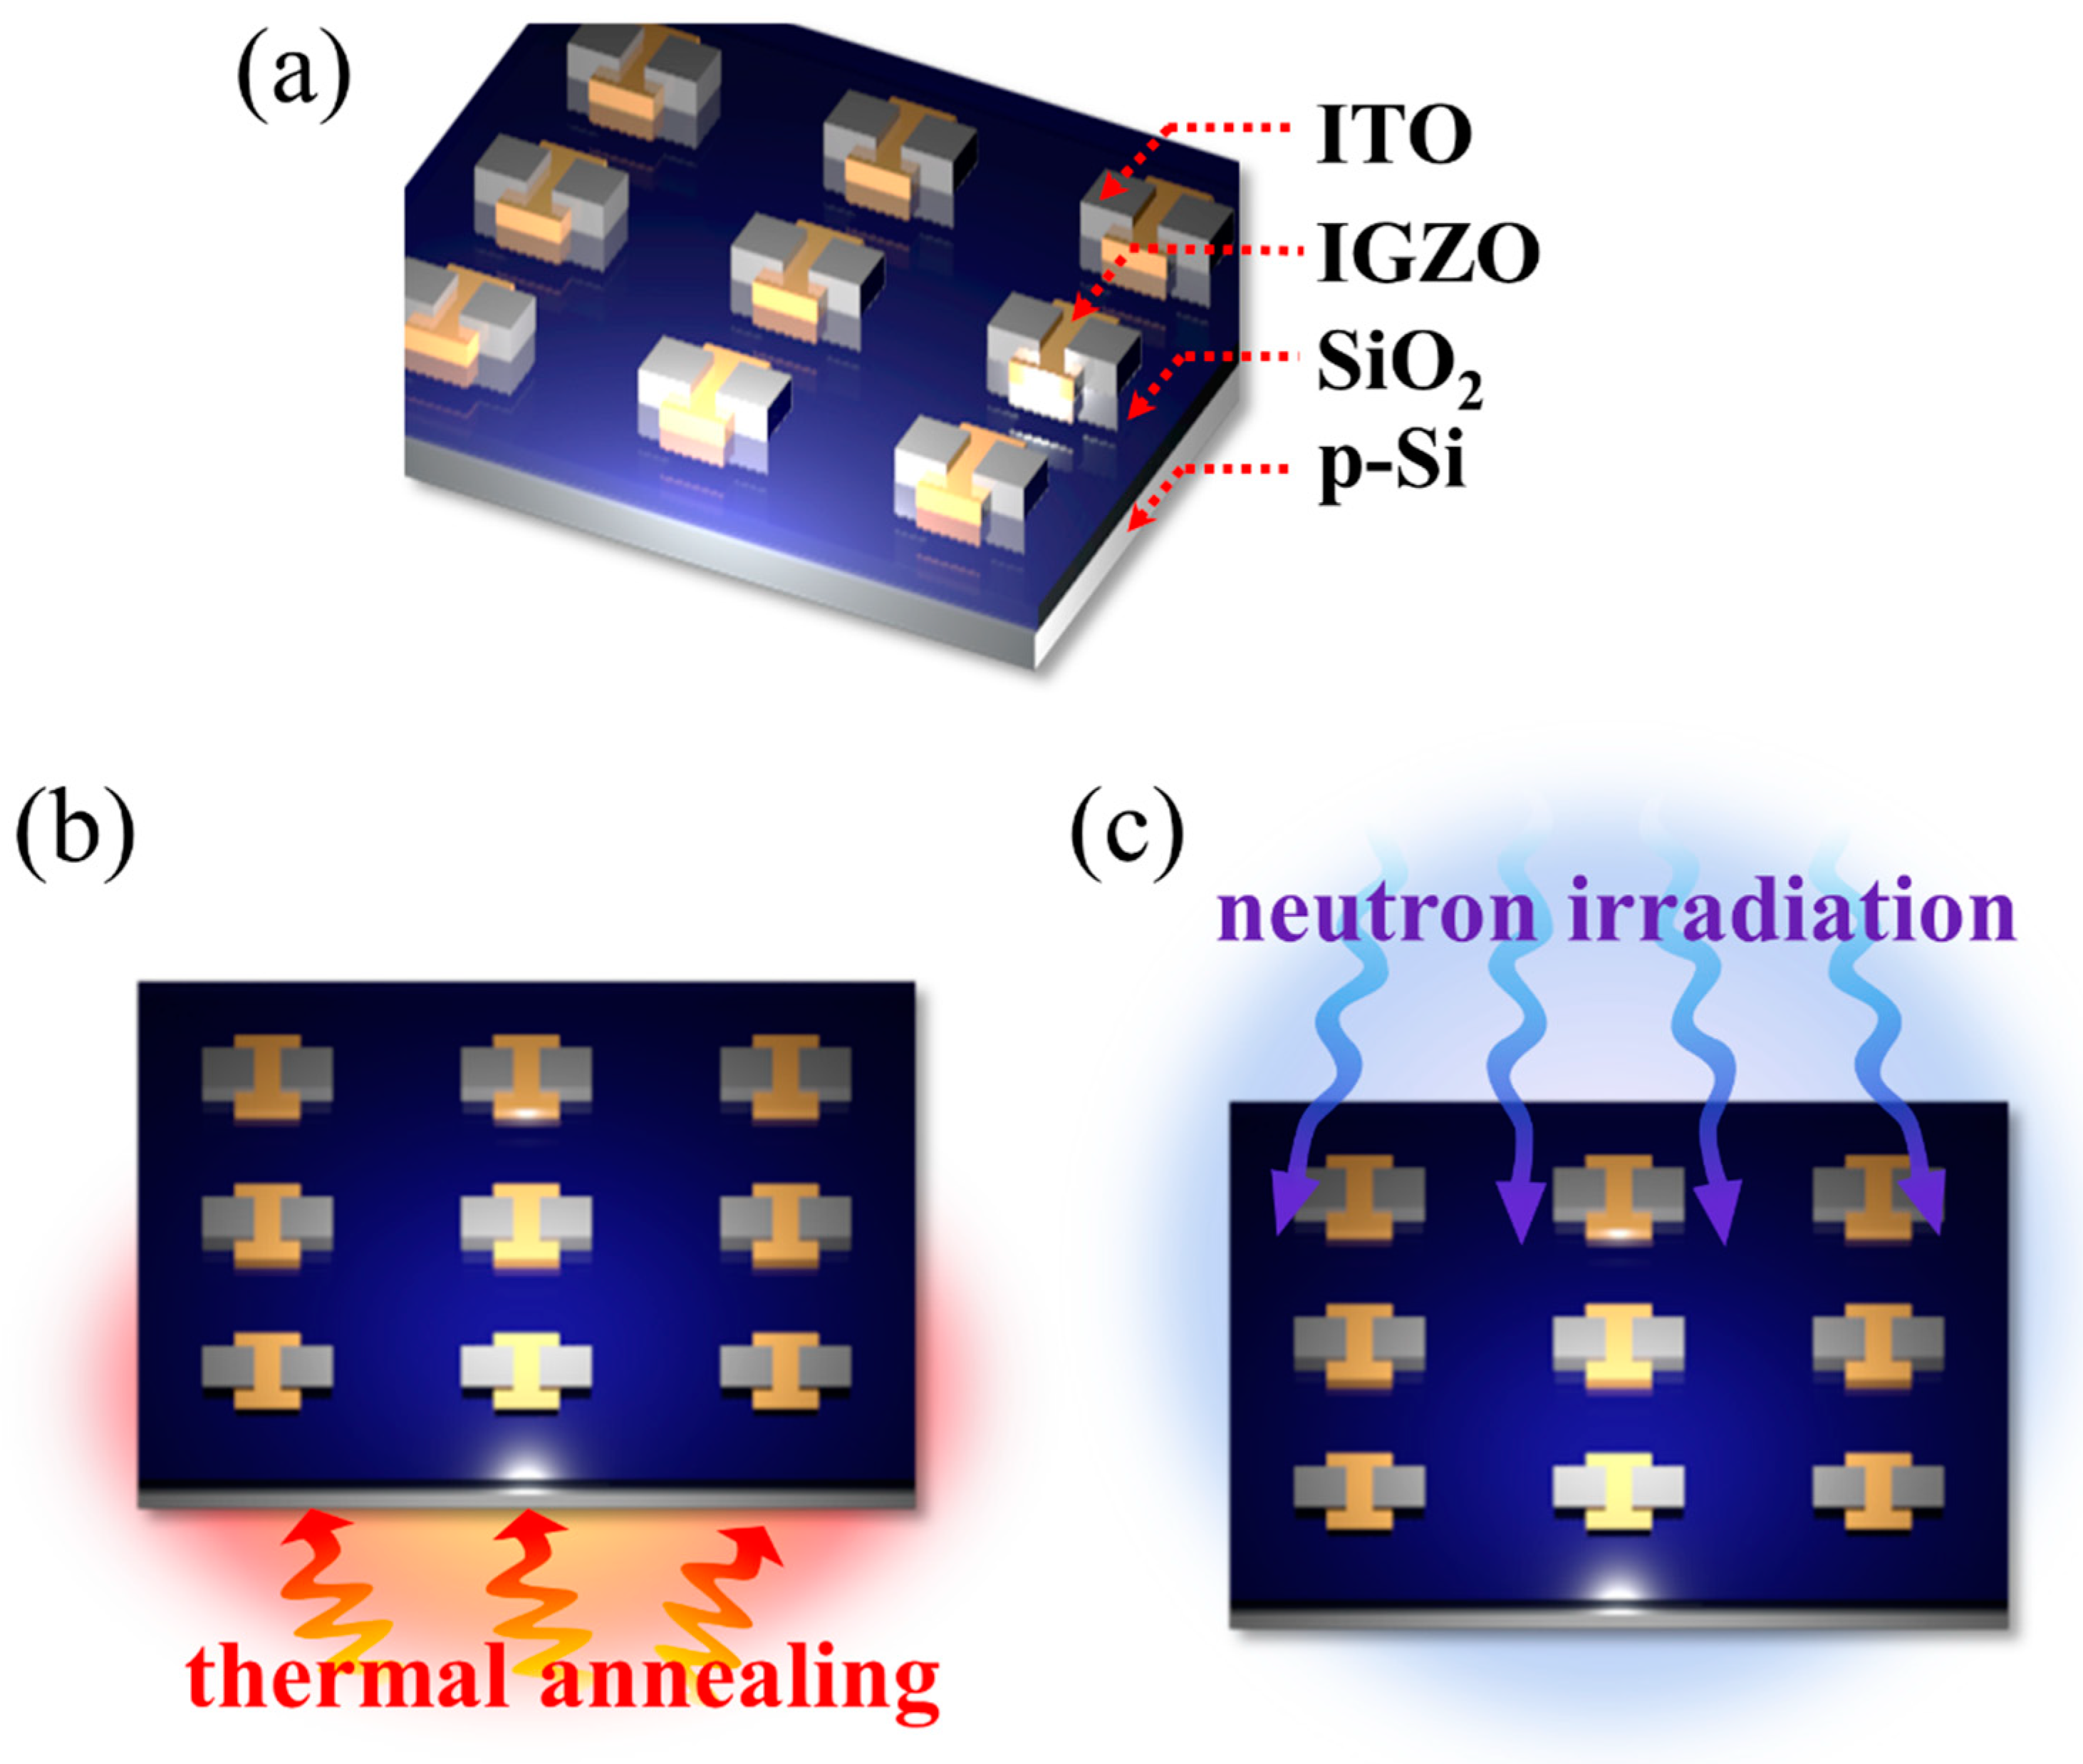 Coatings Free Full Text Improvement Of Electrical Performance By Neutron Irradiation Treatment On Igzo Thin Film Transistors Html